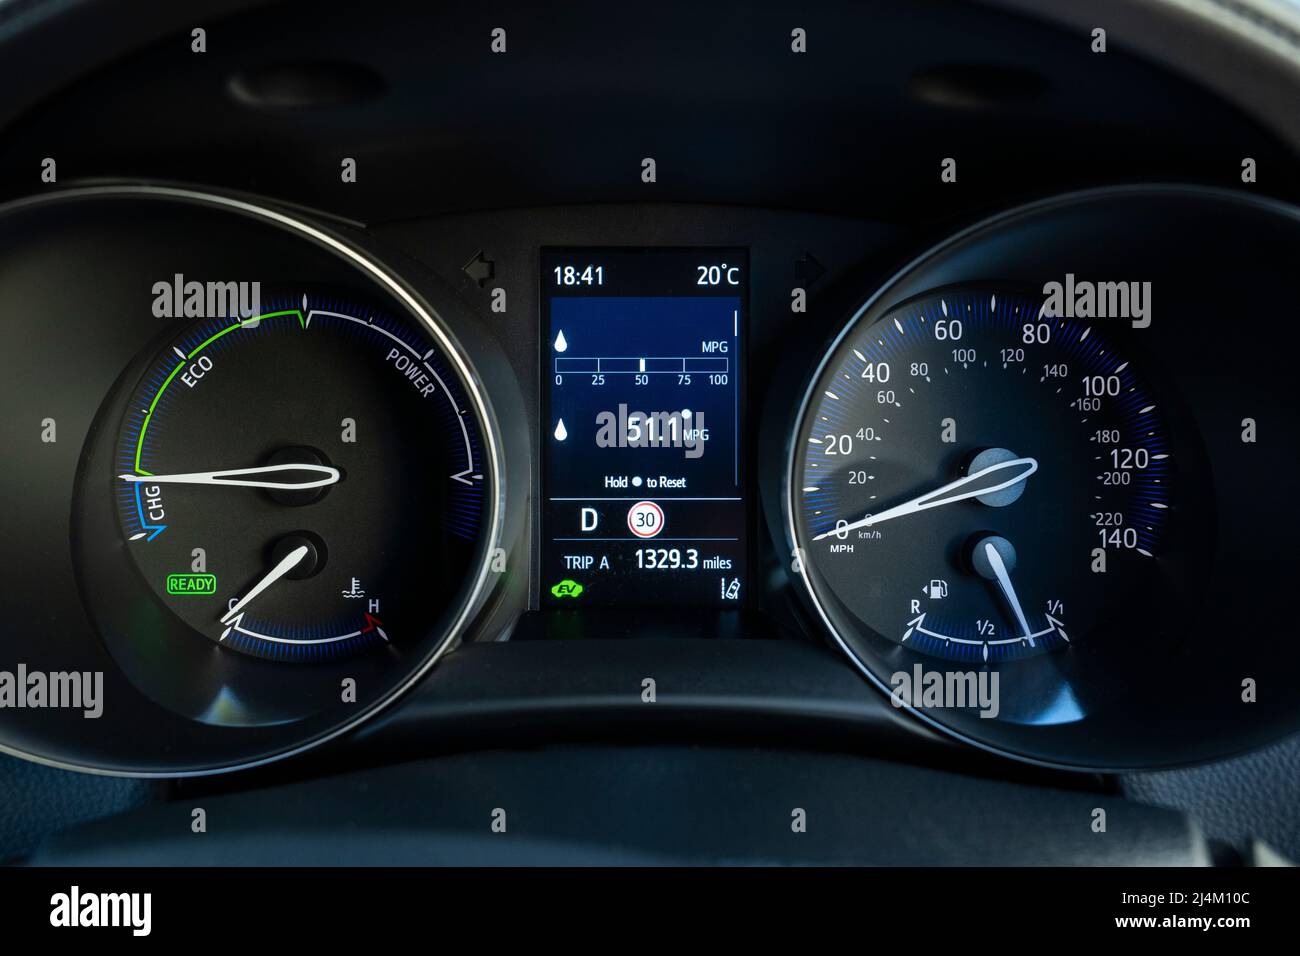 A self charging hybrid dashboard instrument panel showing the car fuel efficiency in mpg and that EV (electric vehicle) mode is on. Toyota CHR. UK Stock Photo